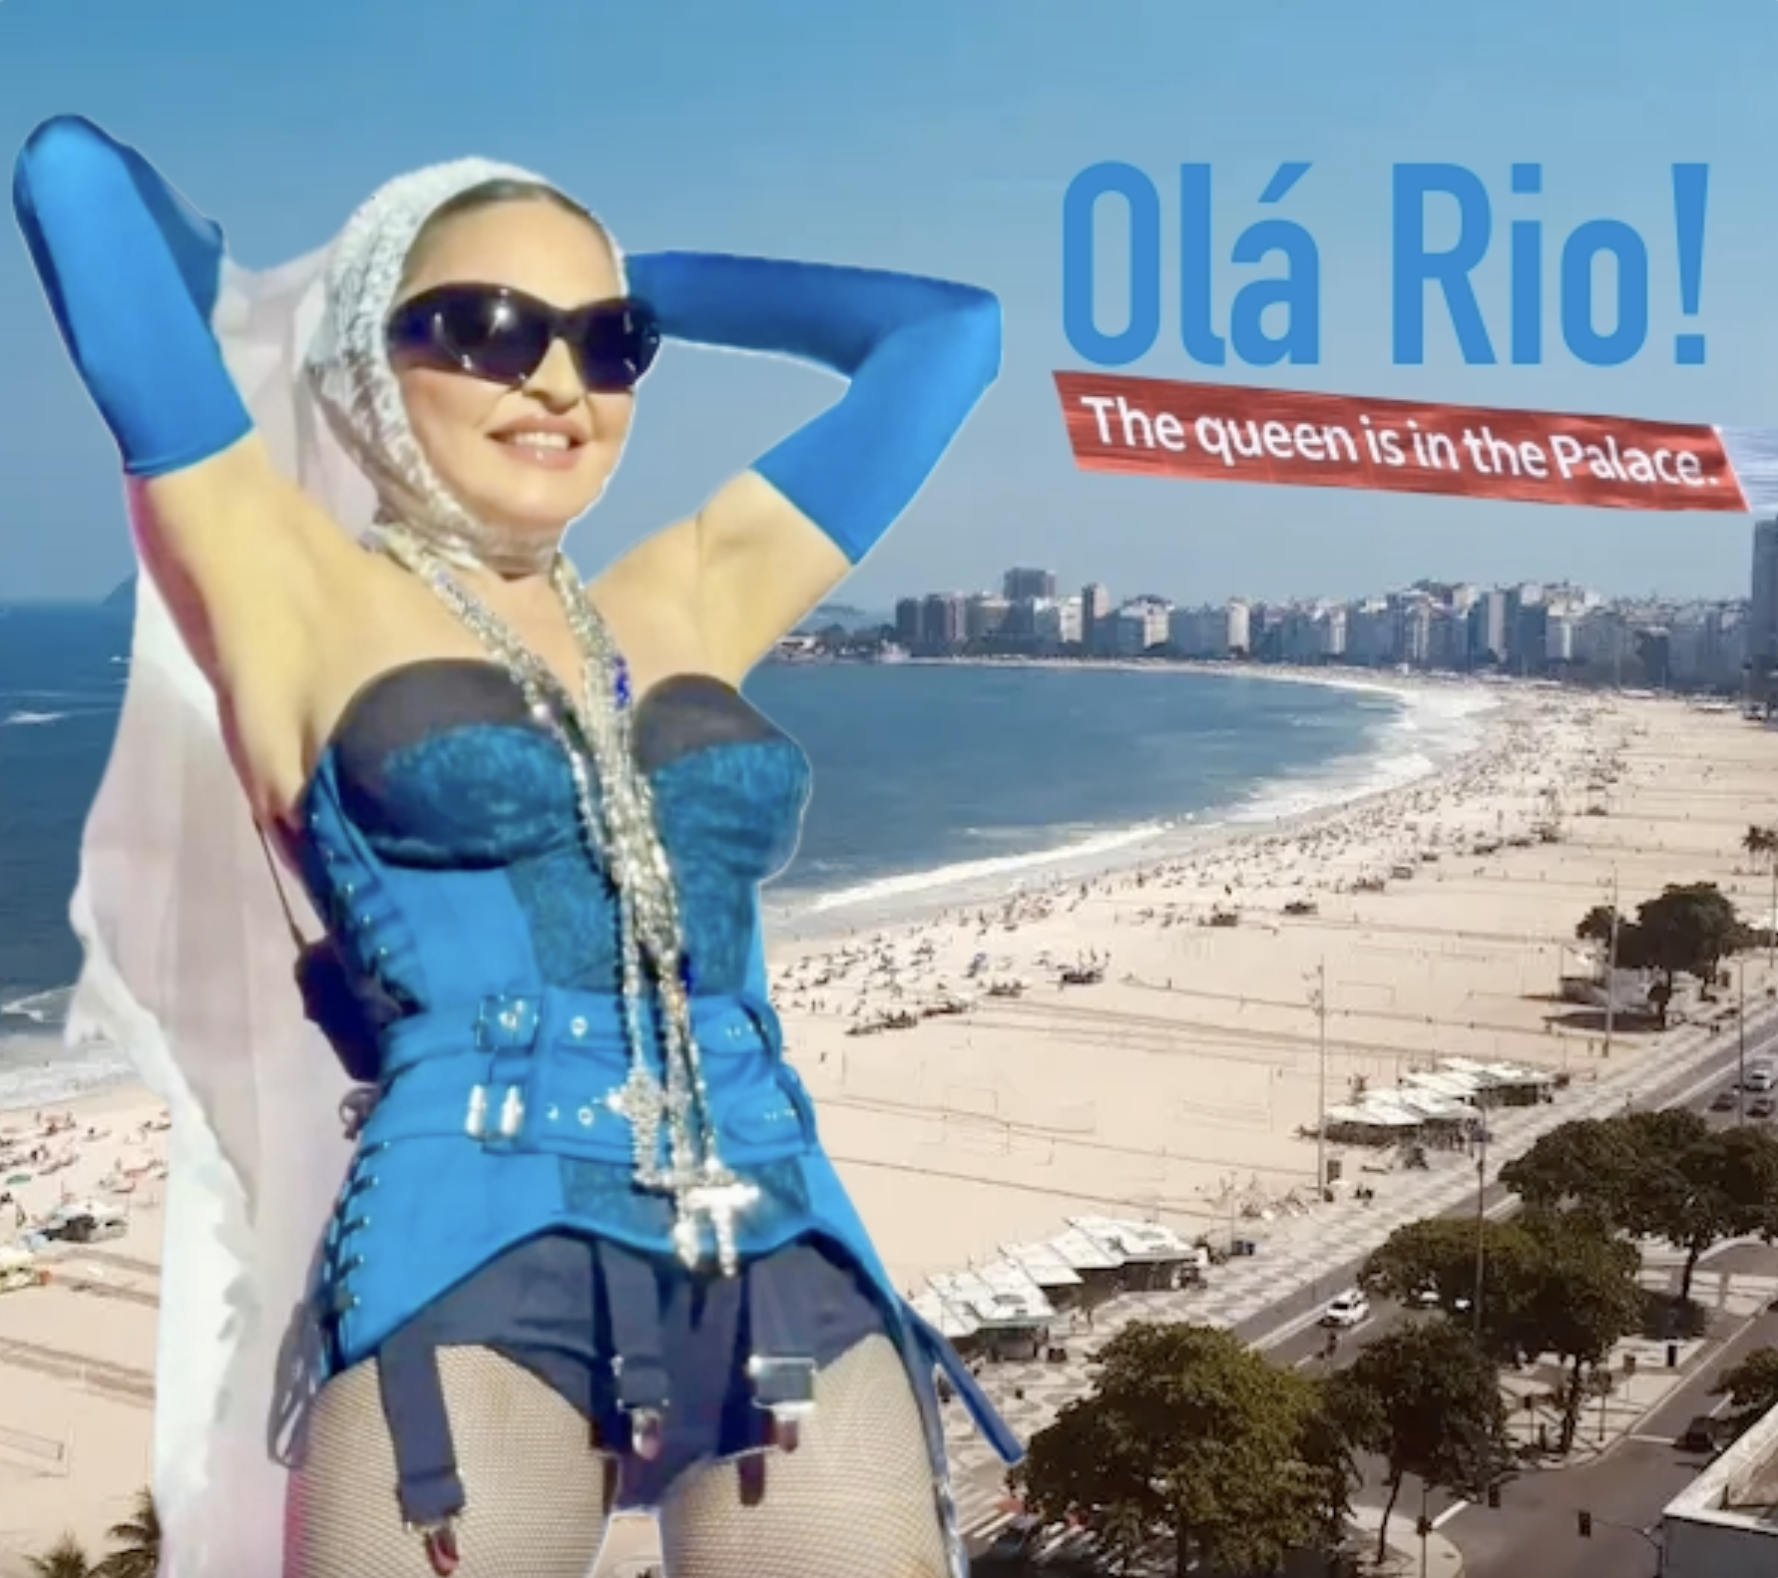 "Olá Rio! The queen is in the Palace" - Montage par News of Madonna